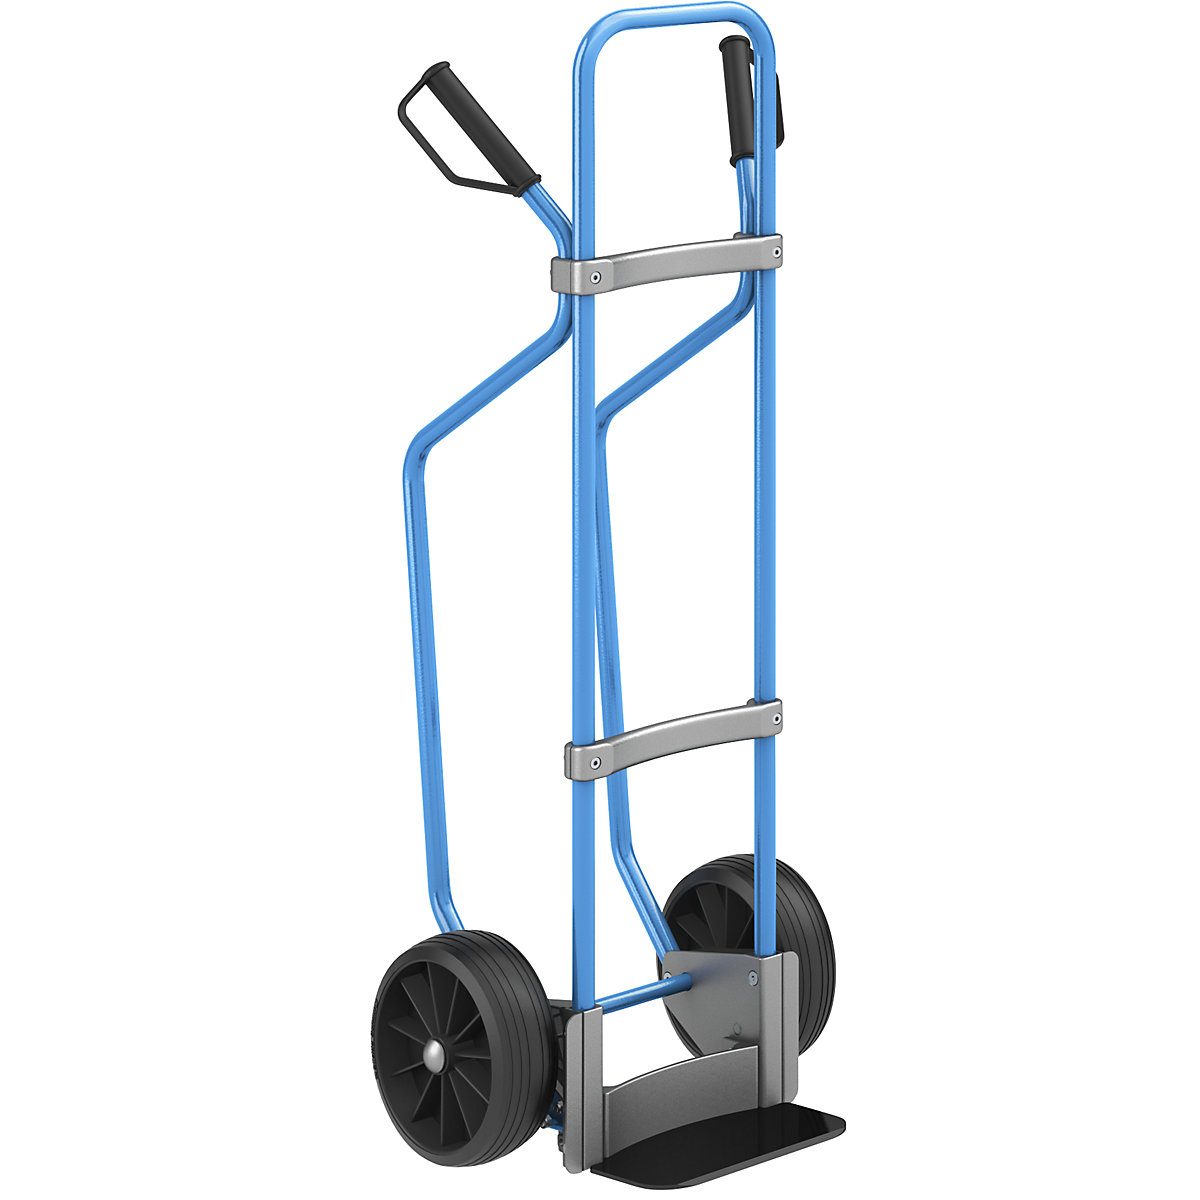 Sack truck with runners, blue – eurokraft pro, footplate WxD 280 x 140 mm, black, solid rubber tyres, 5+ items-1